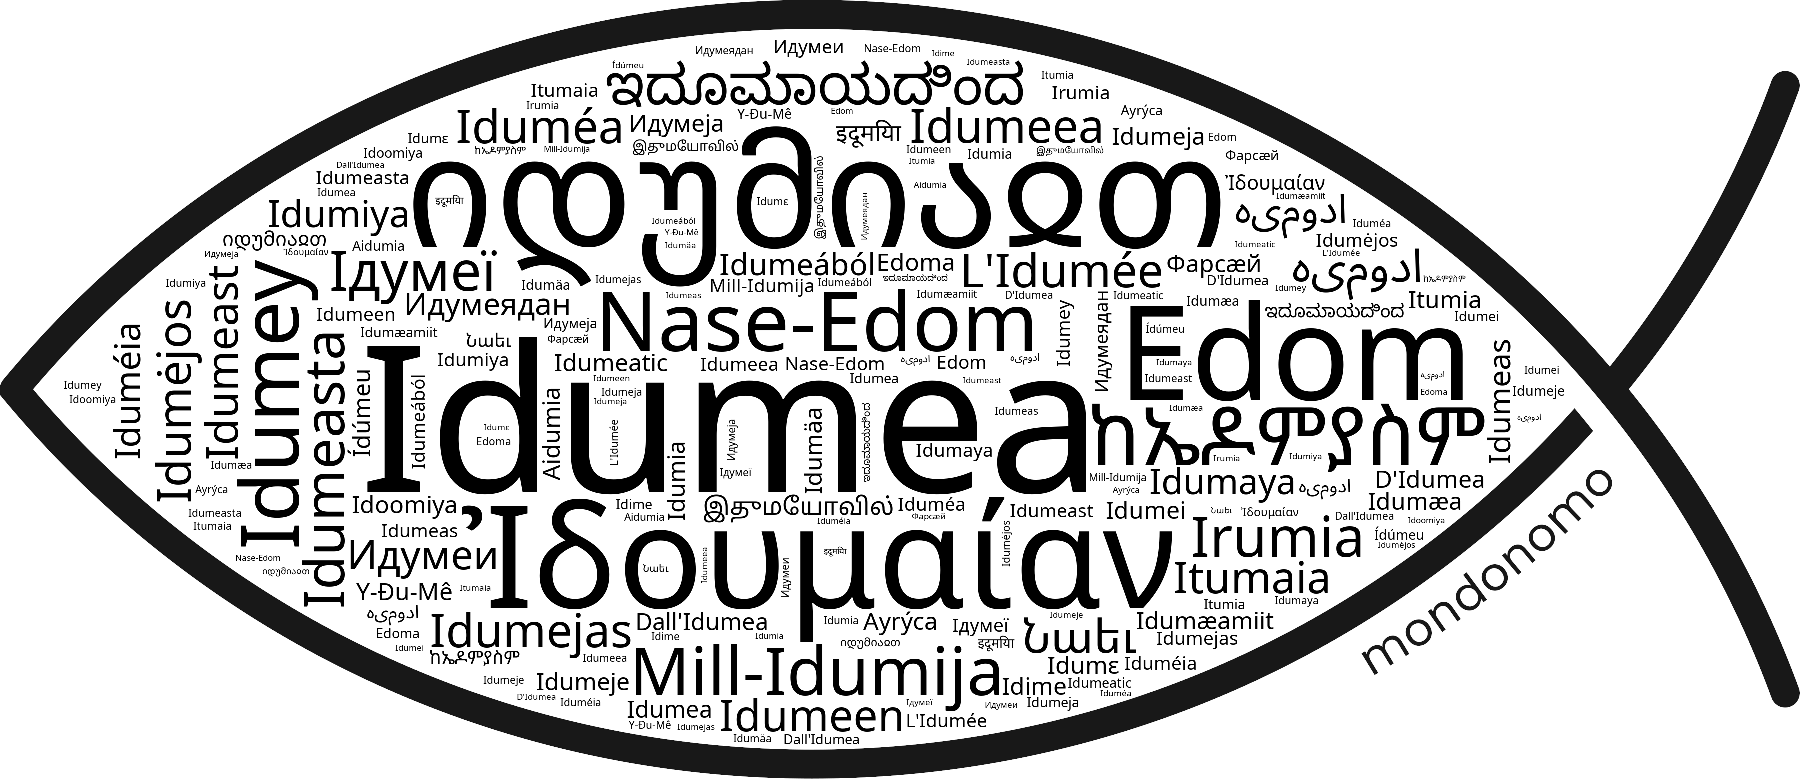 Name Idumea in the world's Bibles